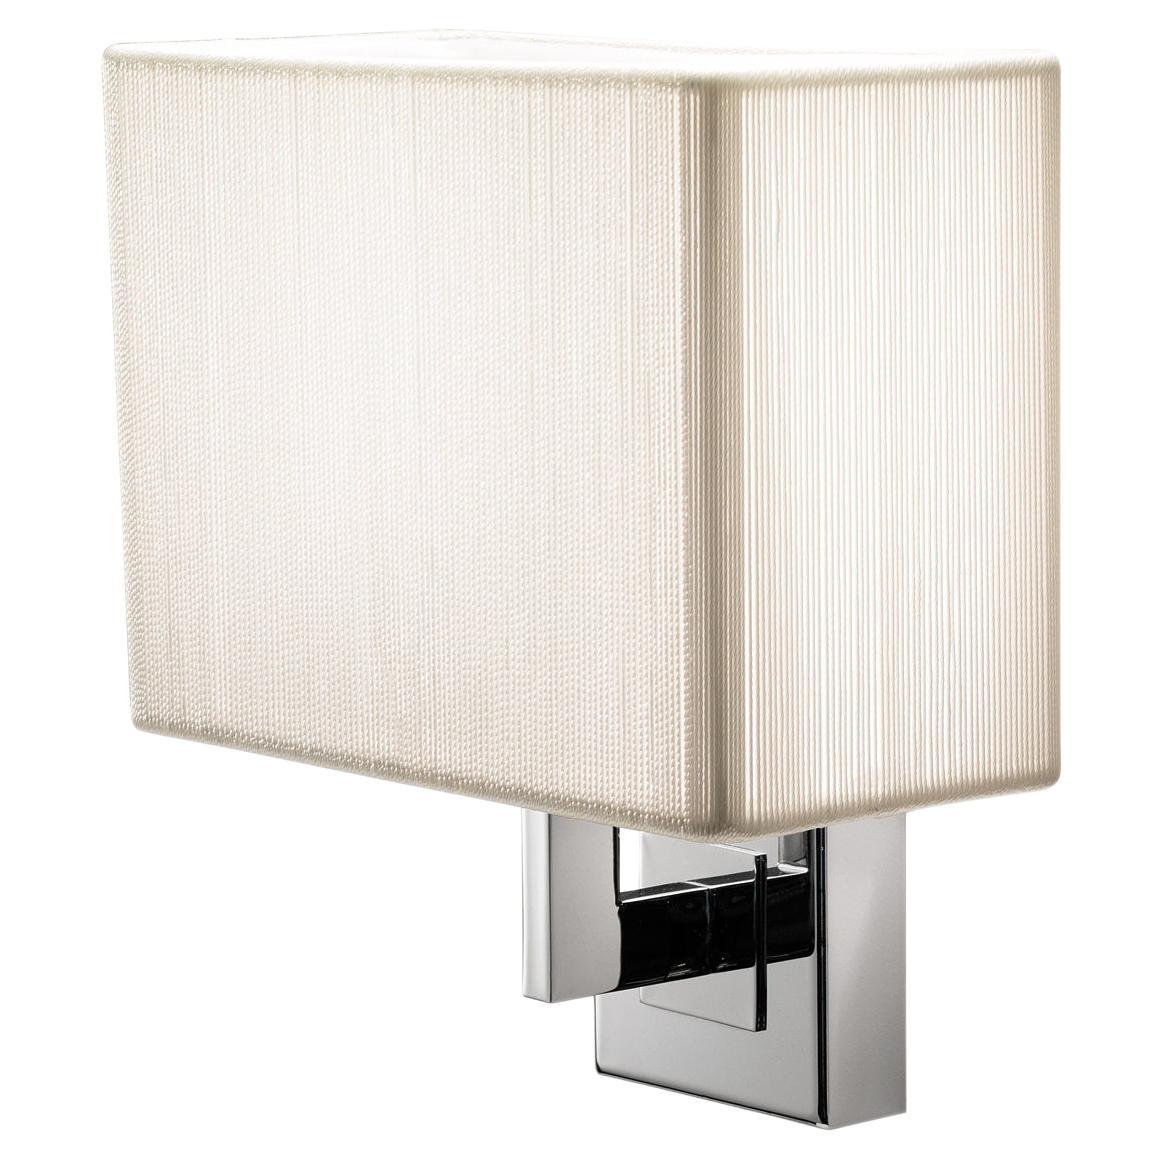 Axolight Clavius Small Wall Lamp with Arm in White Lampshade and Chrome Finish For Sale